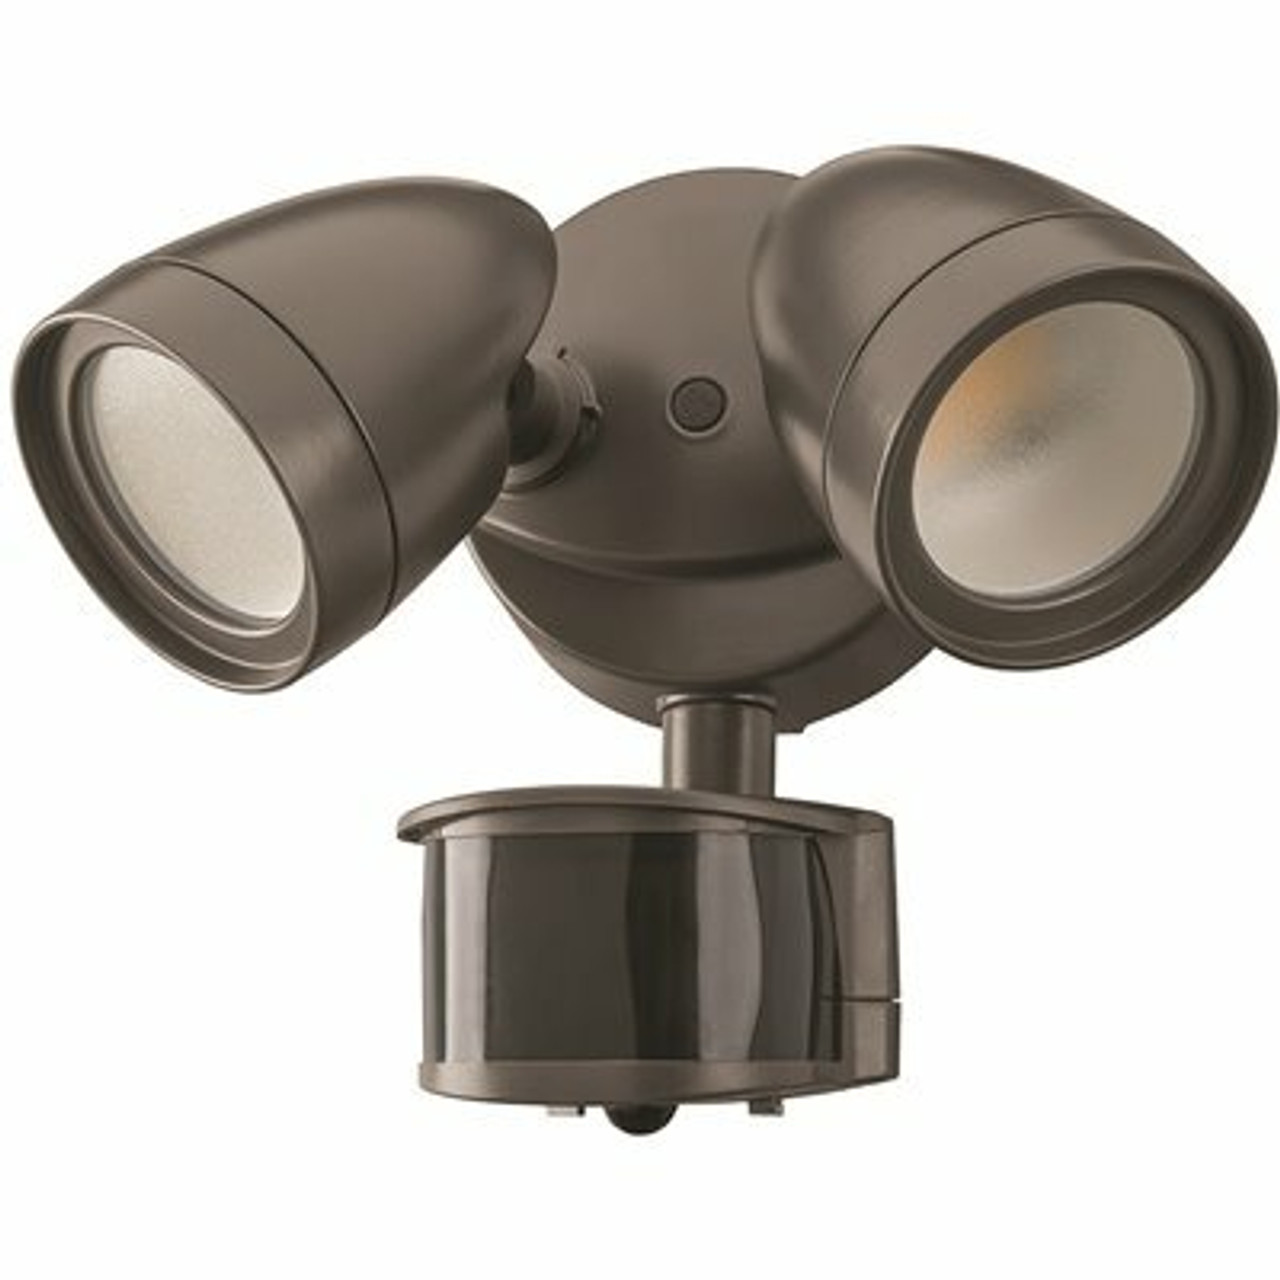 Eti 2-Head Bronze Motion Activated Outdoor Integrated Led Security Flood Light 1200 To 2400 Lumens Boost 3 Cct